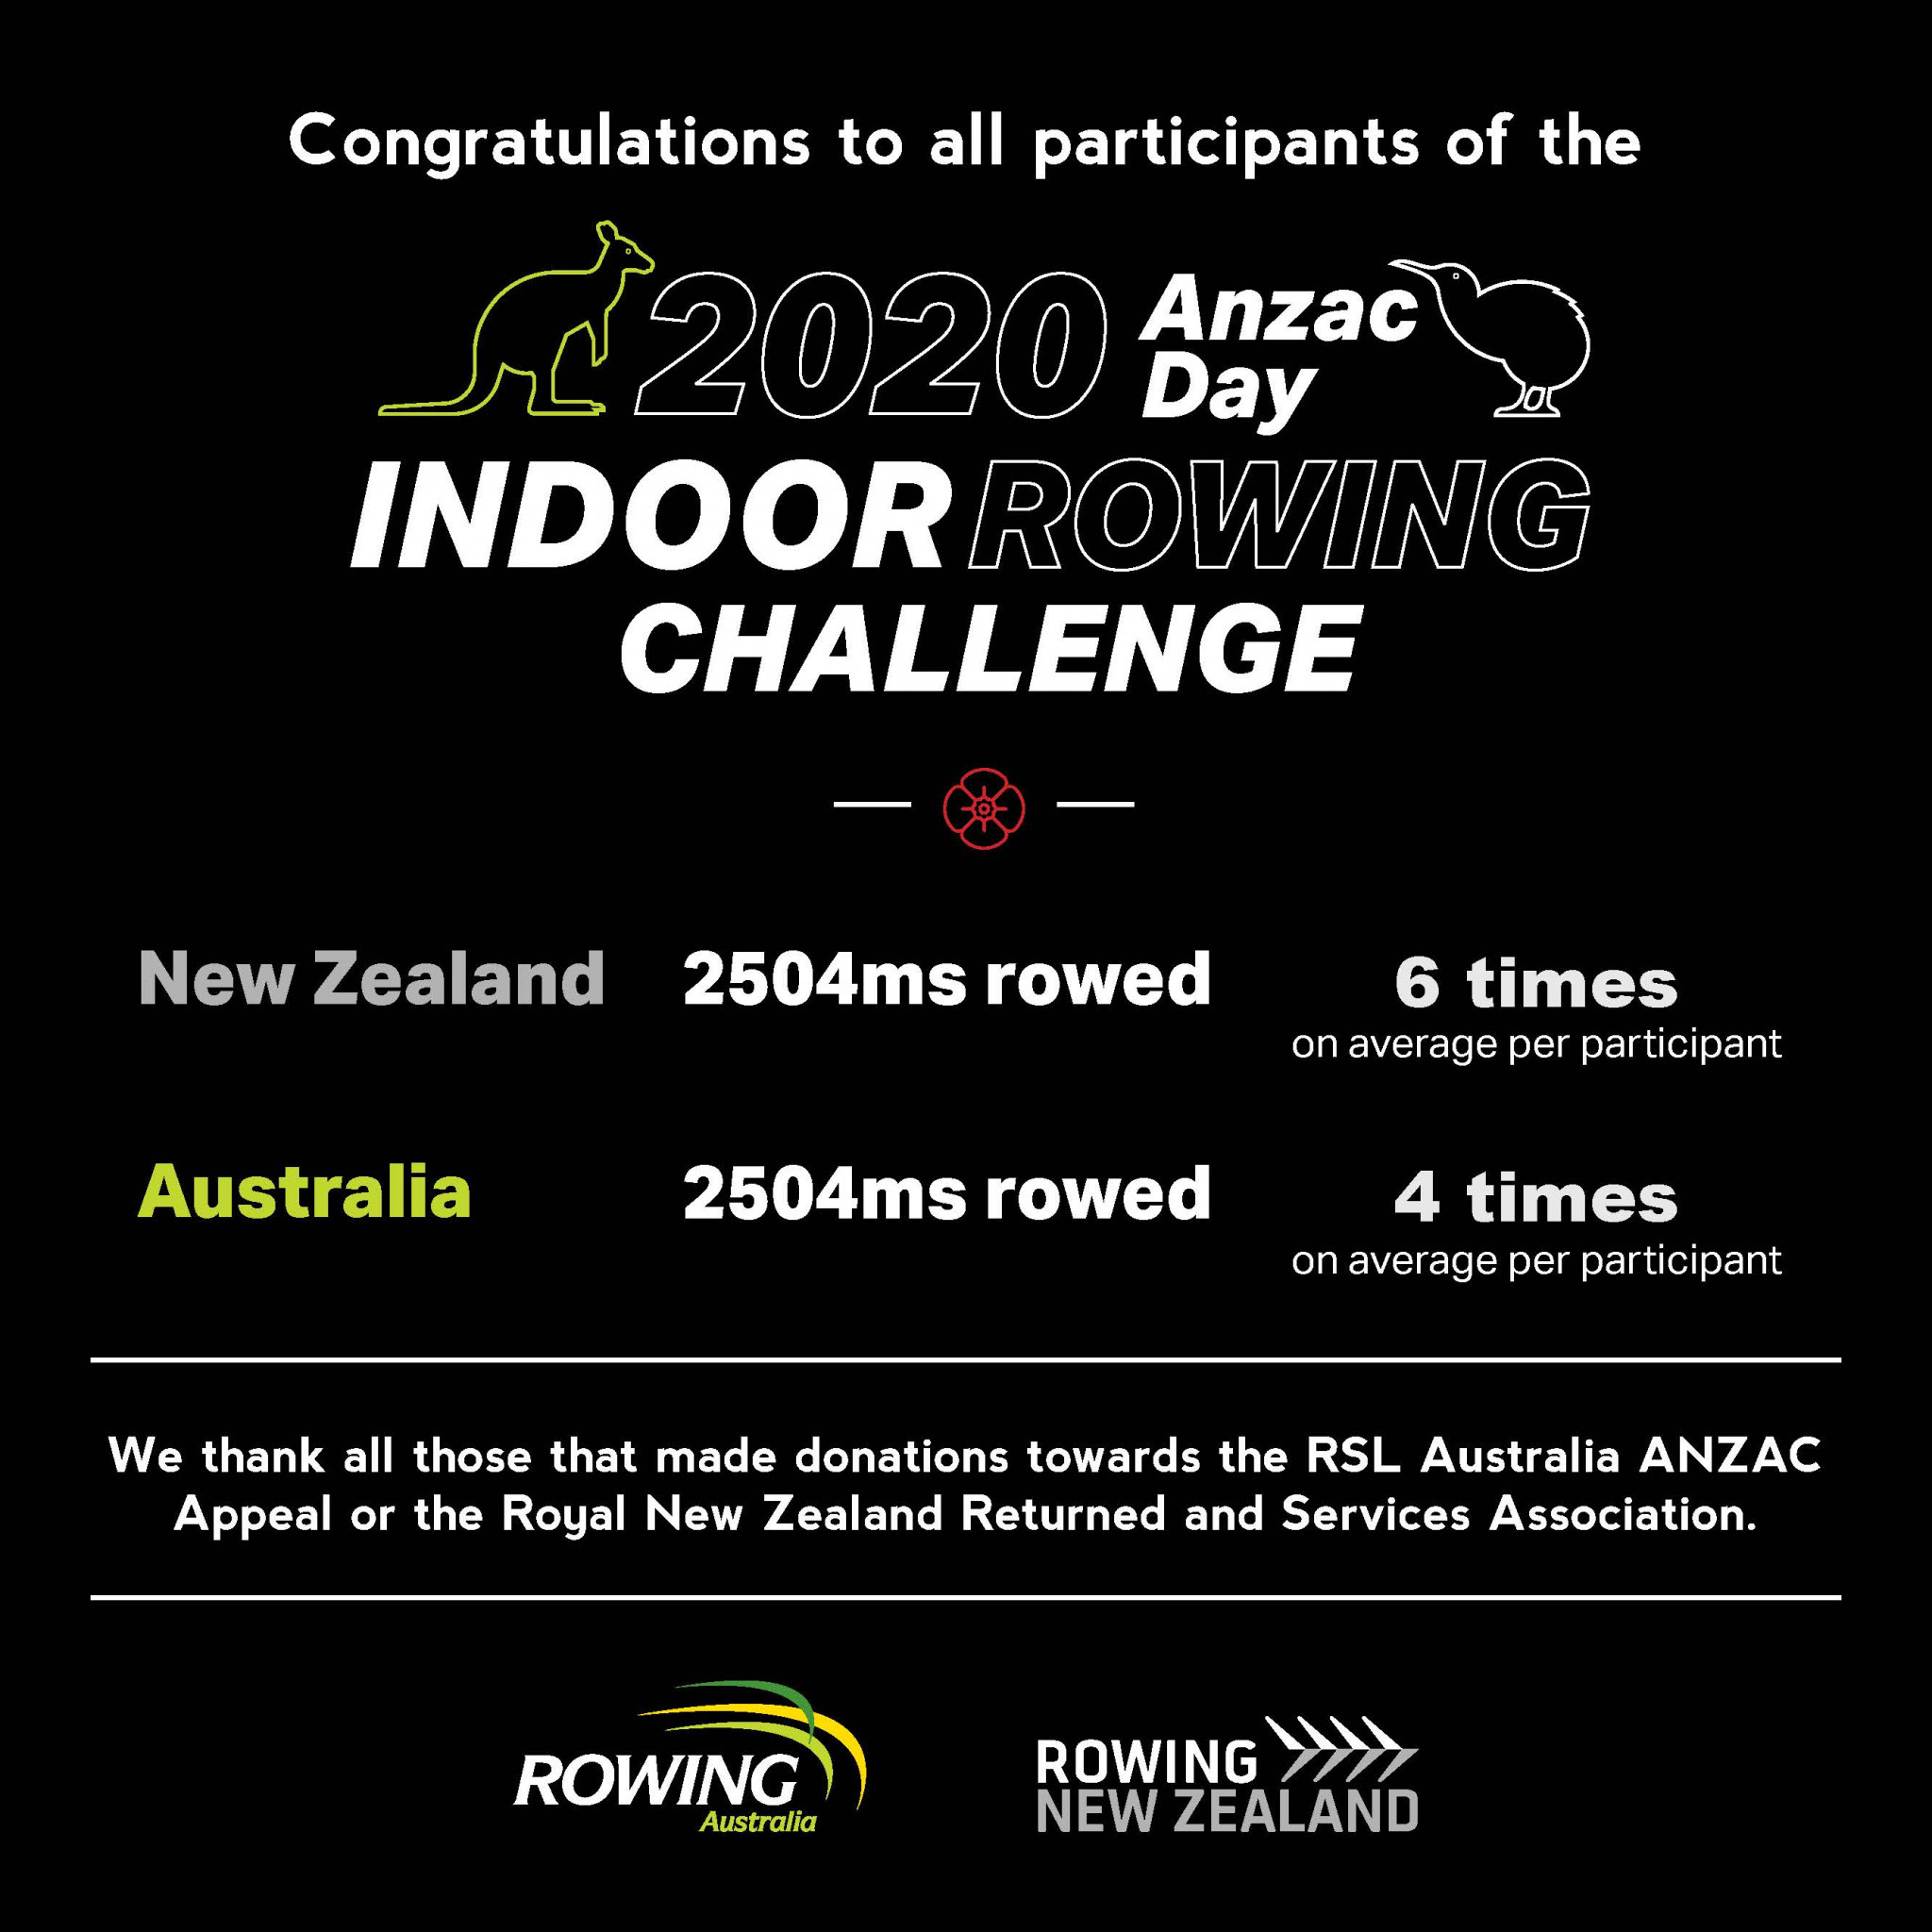 ANZAC Indoor Rowing Challenge for 2020 was won by New Zealand ©Twitter/@RowingAust